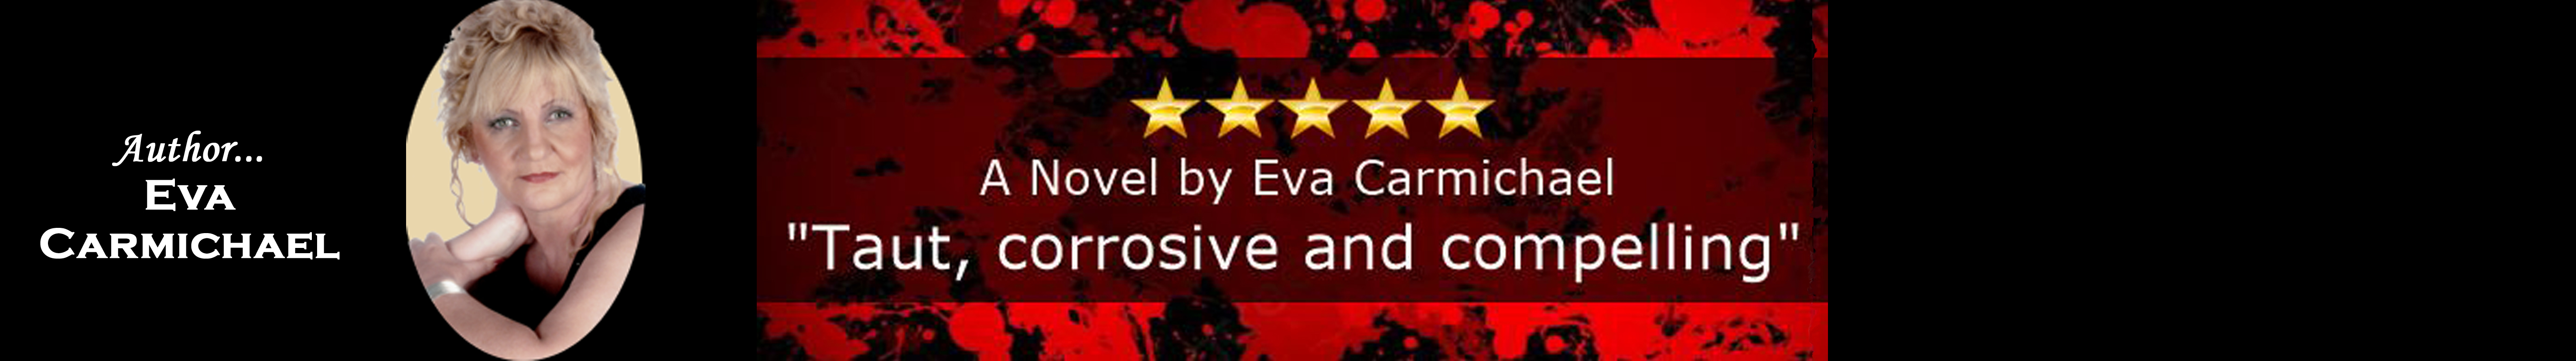 banner picture of Bad Blood Rising written by Eva Carmichael